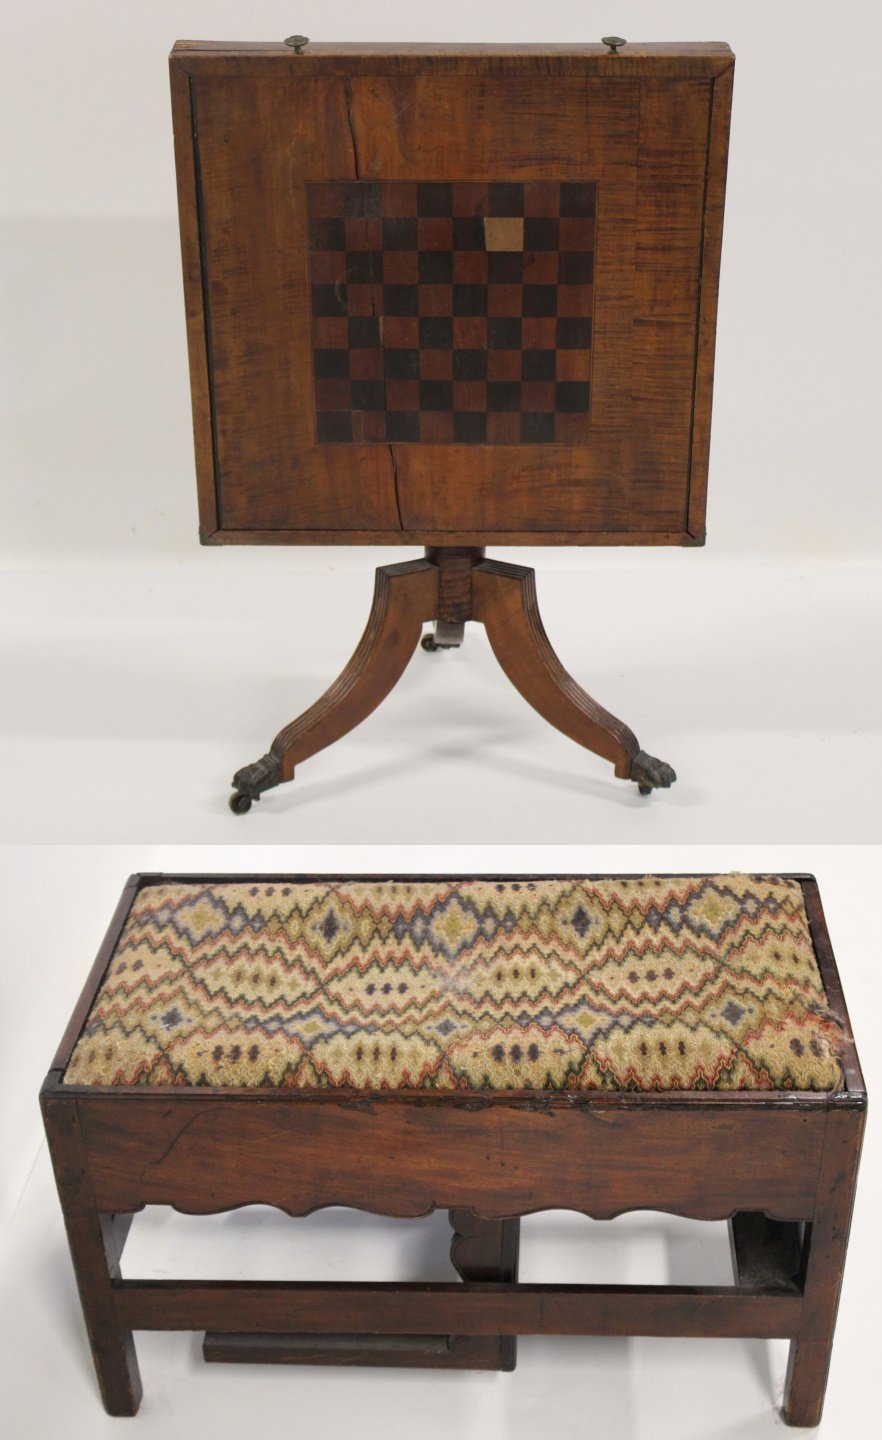 ANTIQUE GAME TABLE & A METAMORPHIC